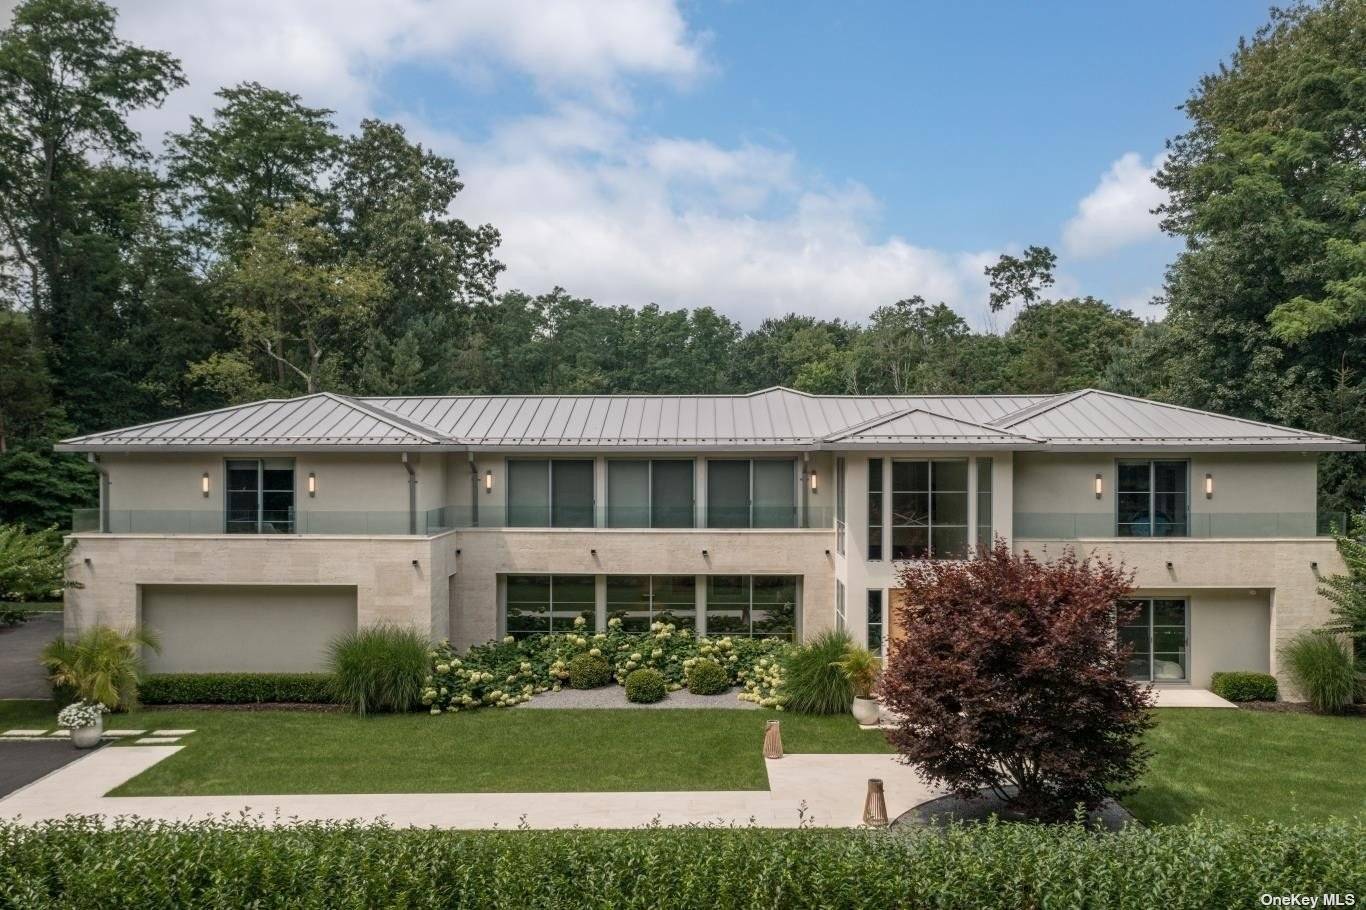 Modern home sets a new standard for luxury in Laurel Hollow.